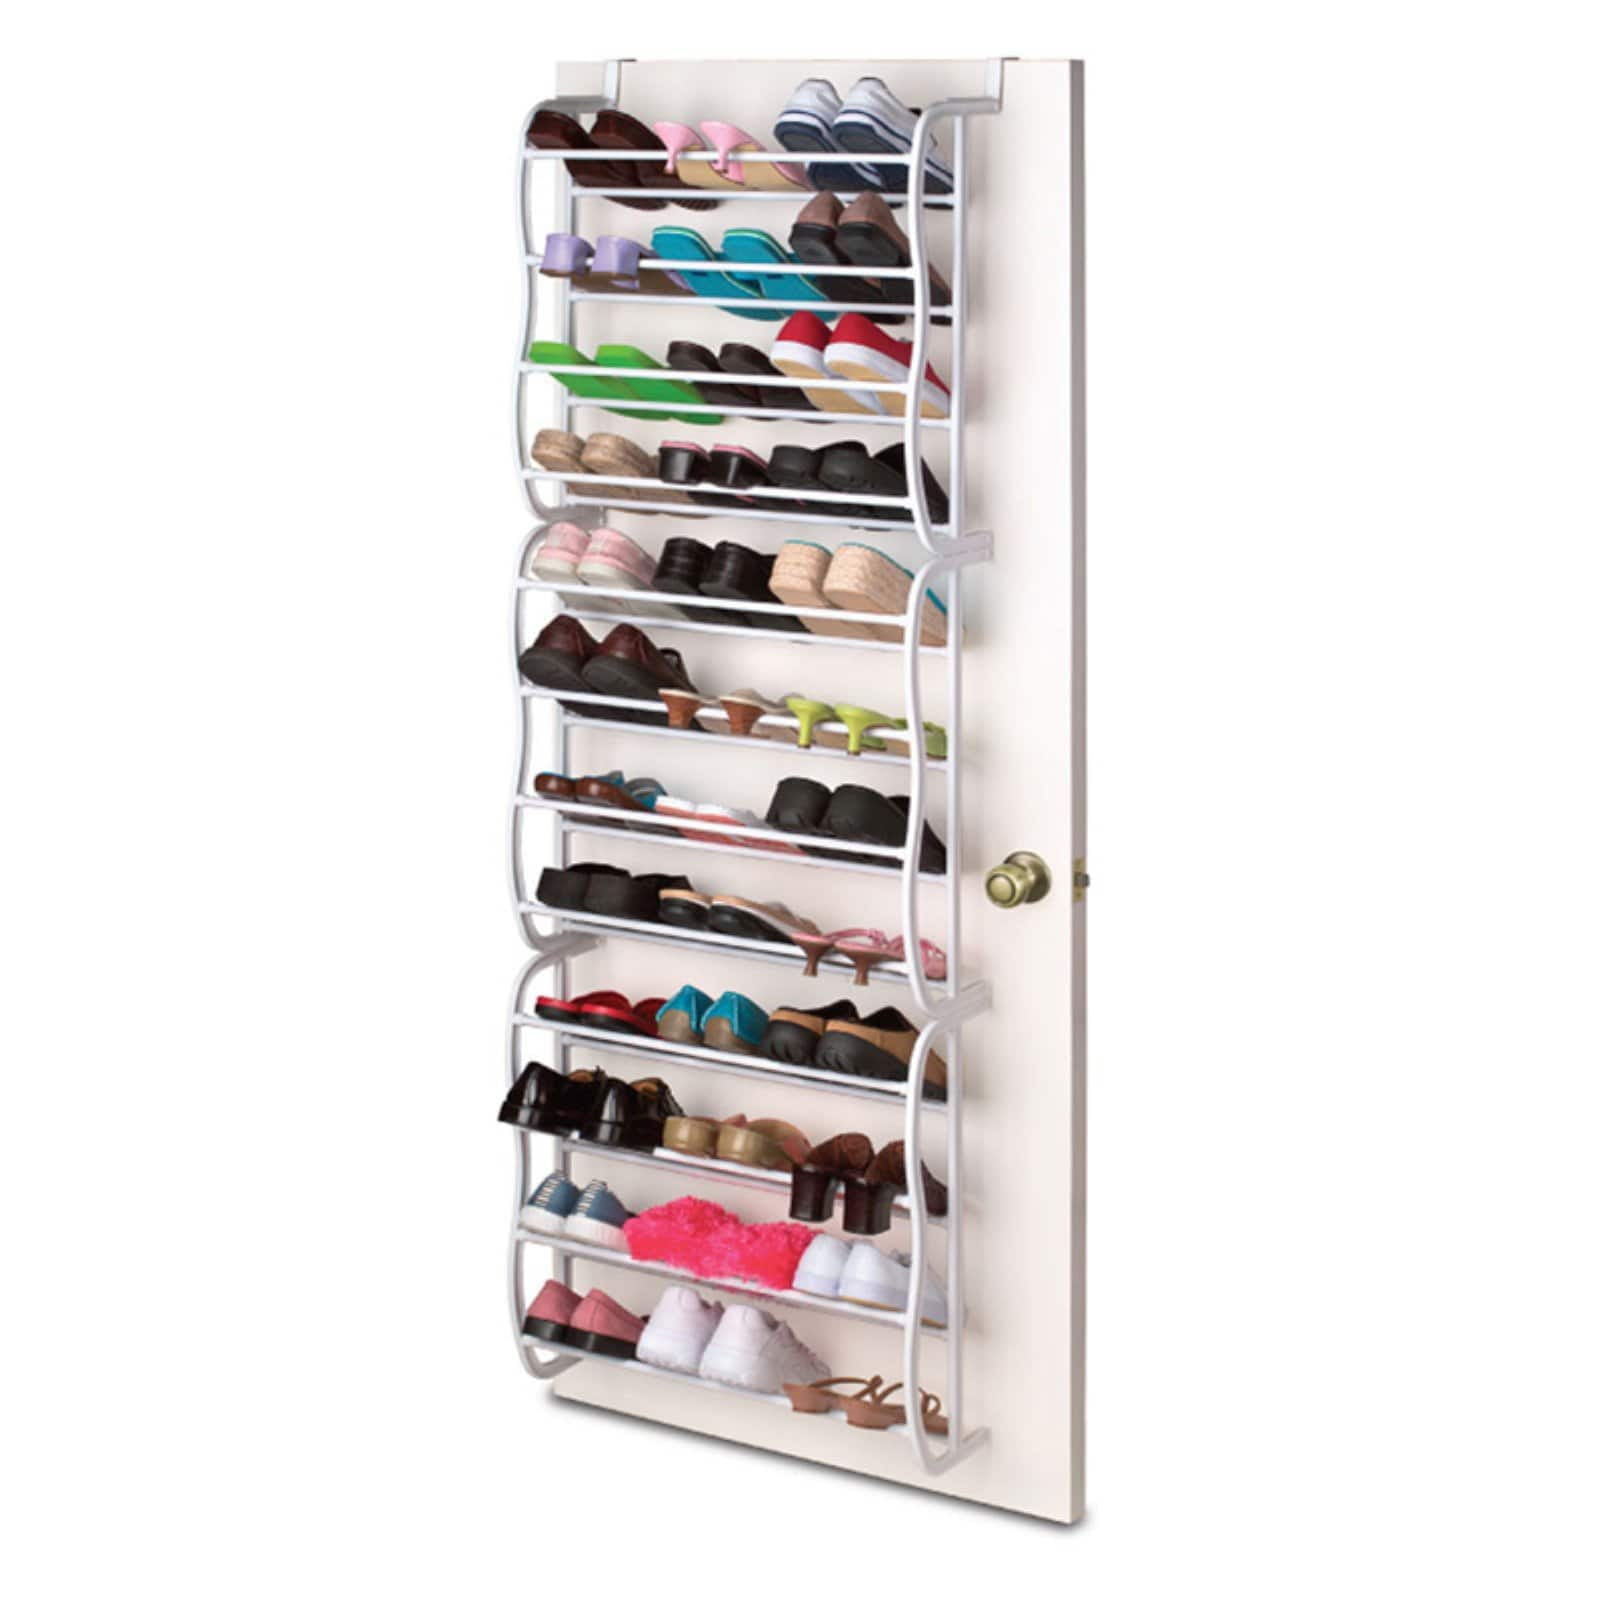 US Stock Rampmu 36 Pairs Metal and Plastic Over The Door Shoe Racks Clear for Dorm Space Saving Large Shoe Organizer